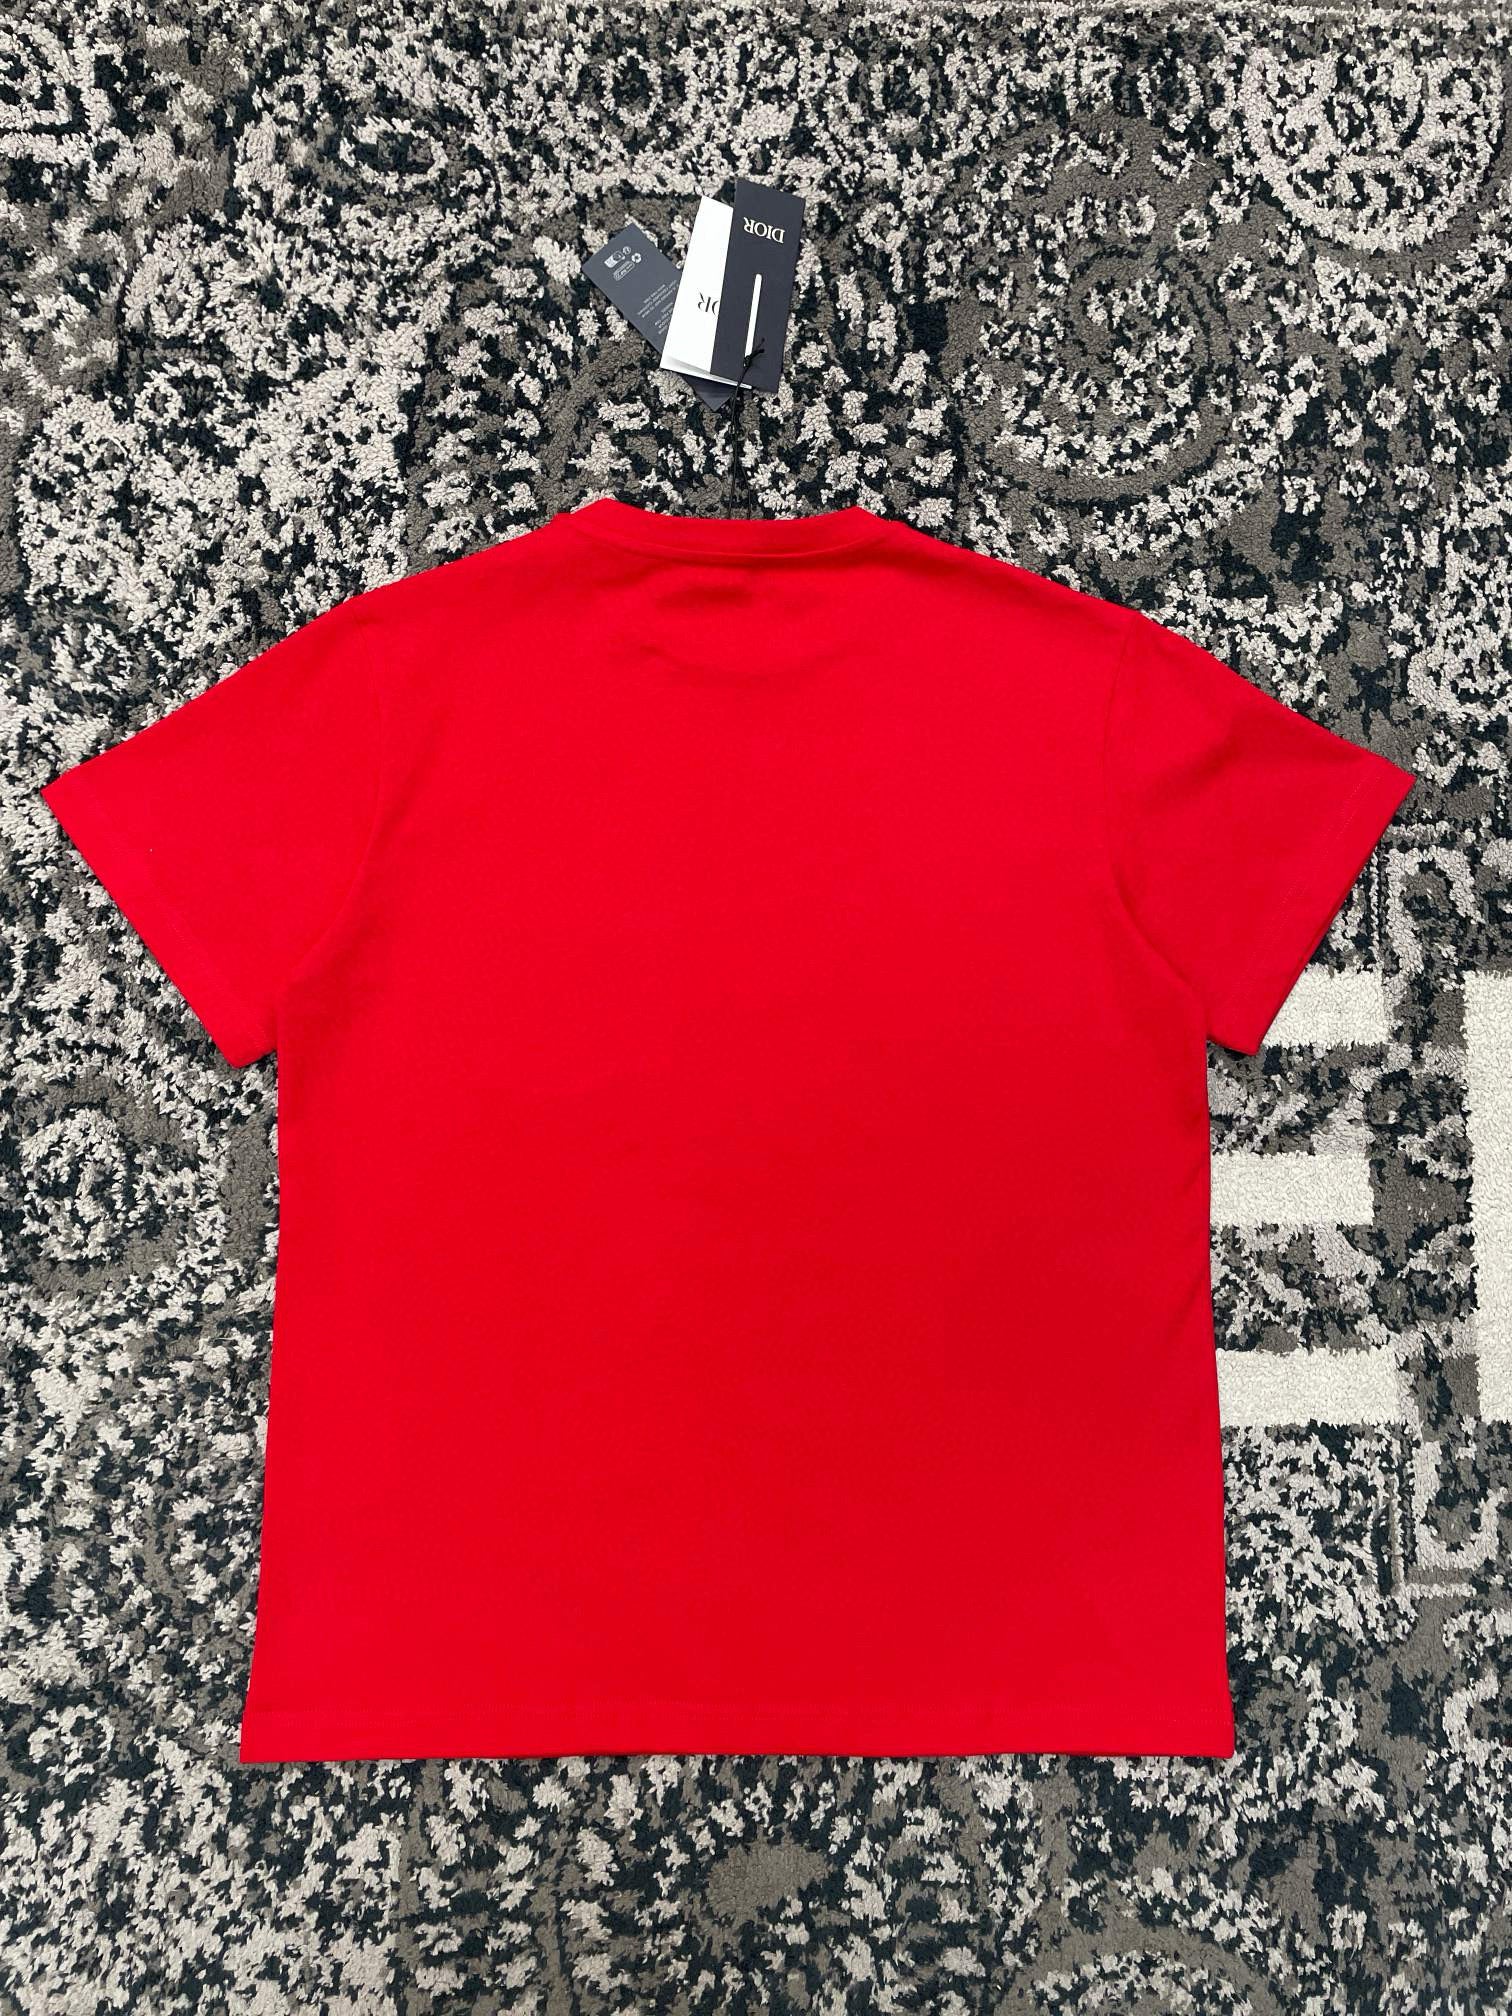 Red and White T-shirt